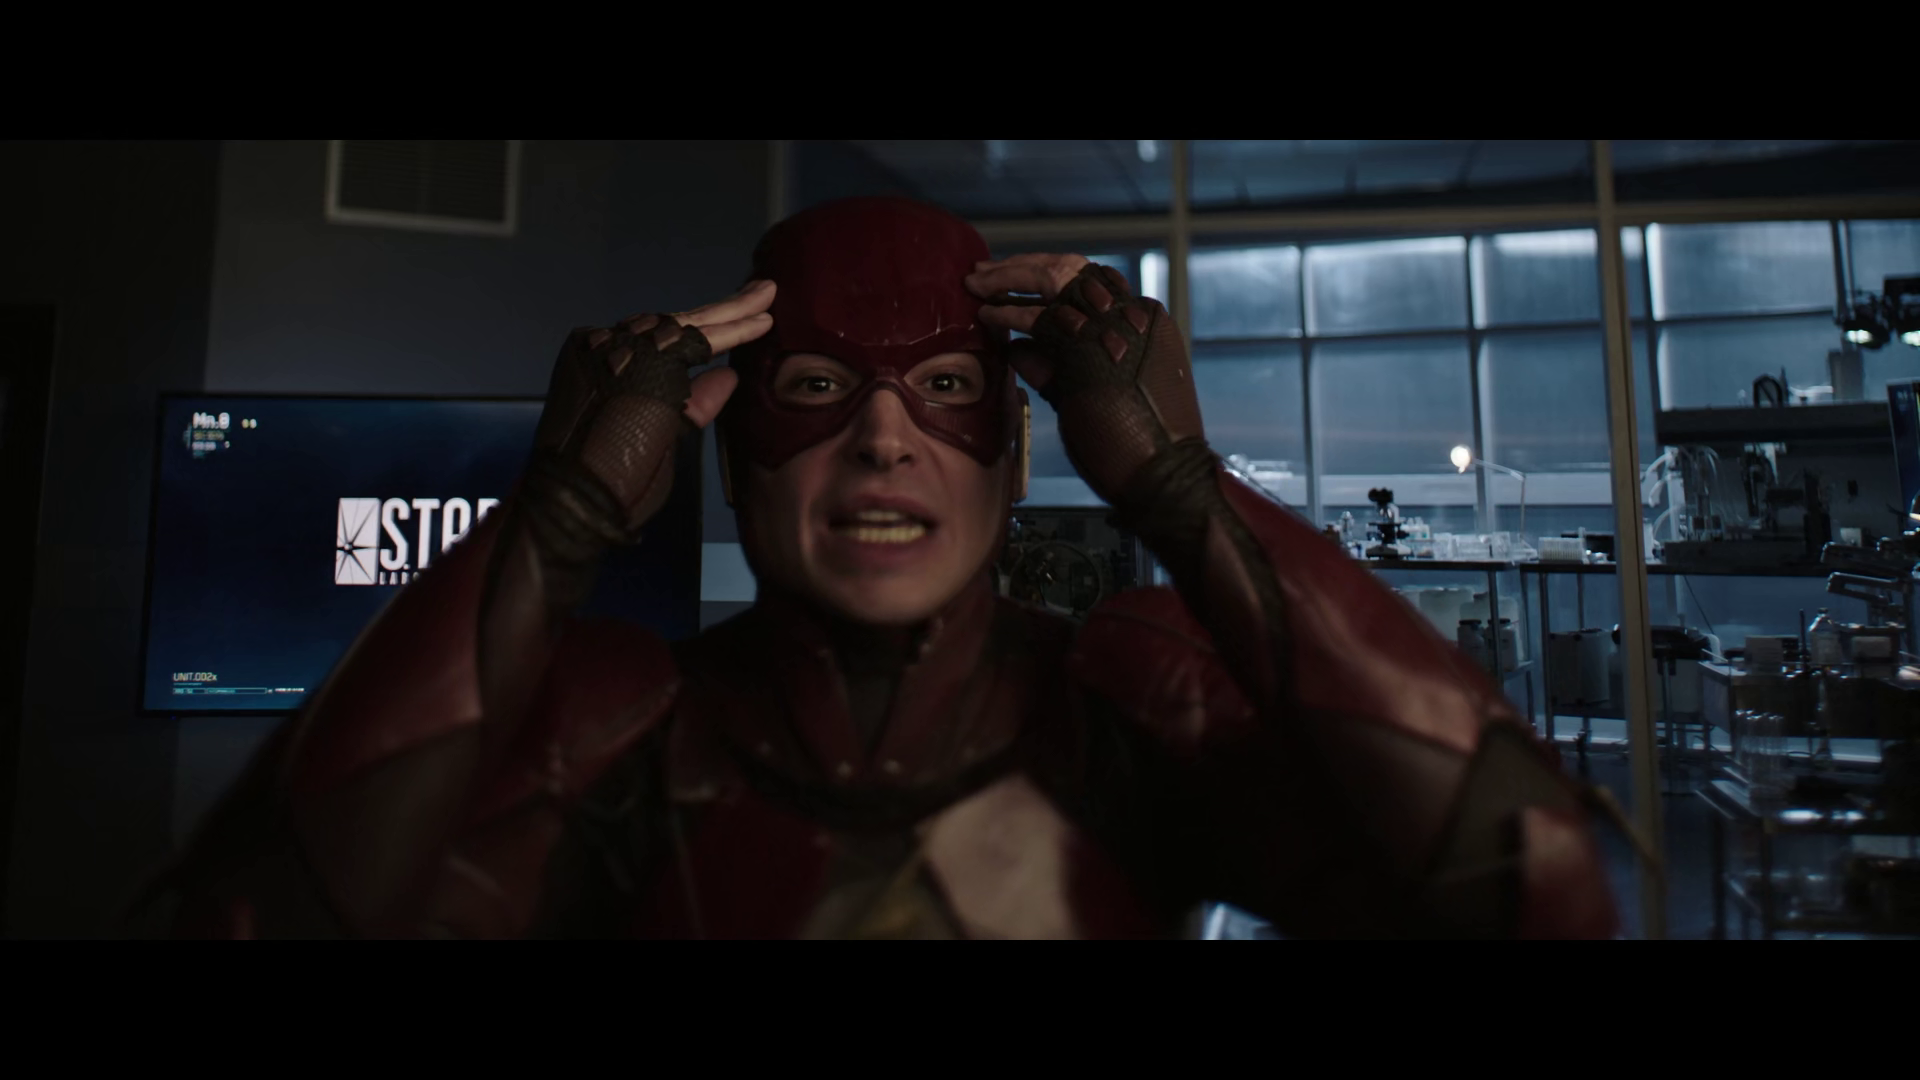 Barry Allen (Ezra Miller) discovers the multiverse is real in Arrow Season 8 Episode 8 “Crisis on Infinite Earths: Part Four” (2020), The CW